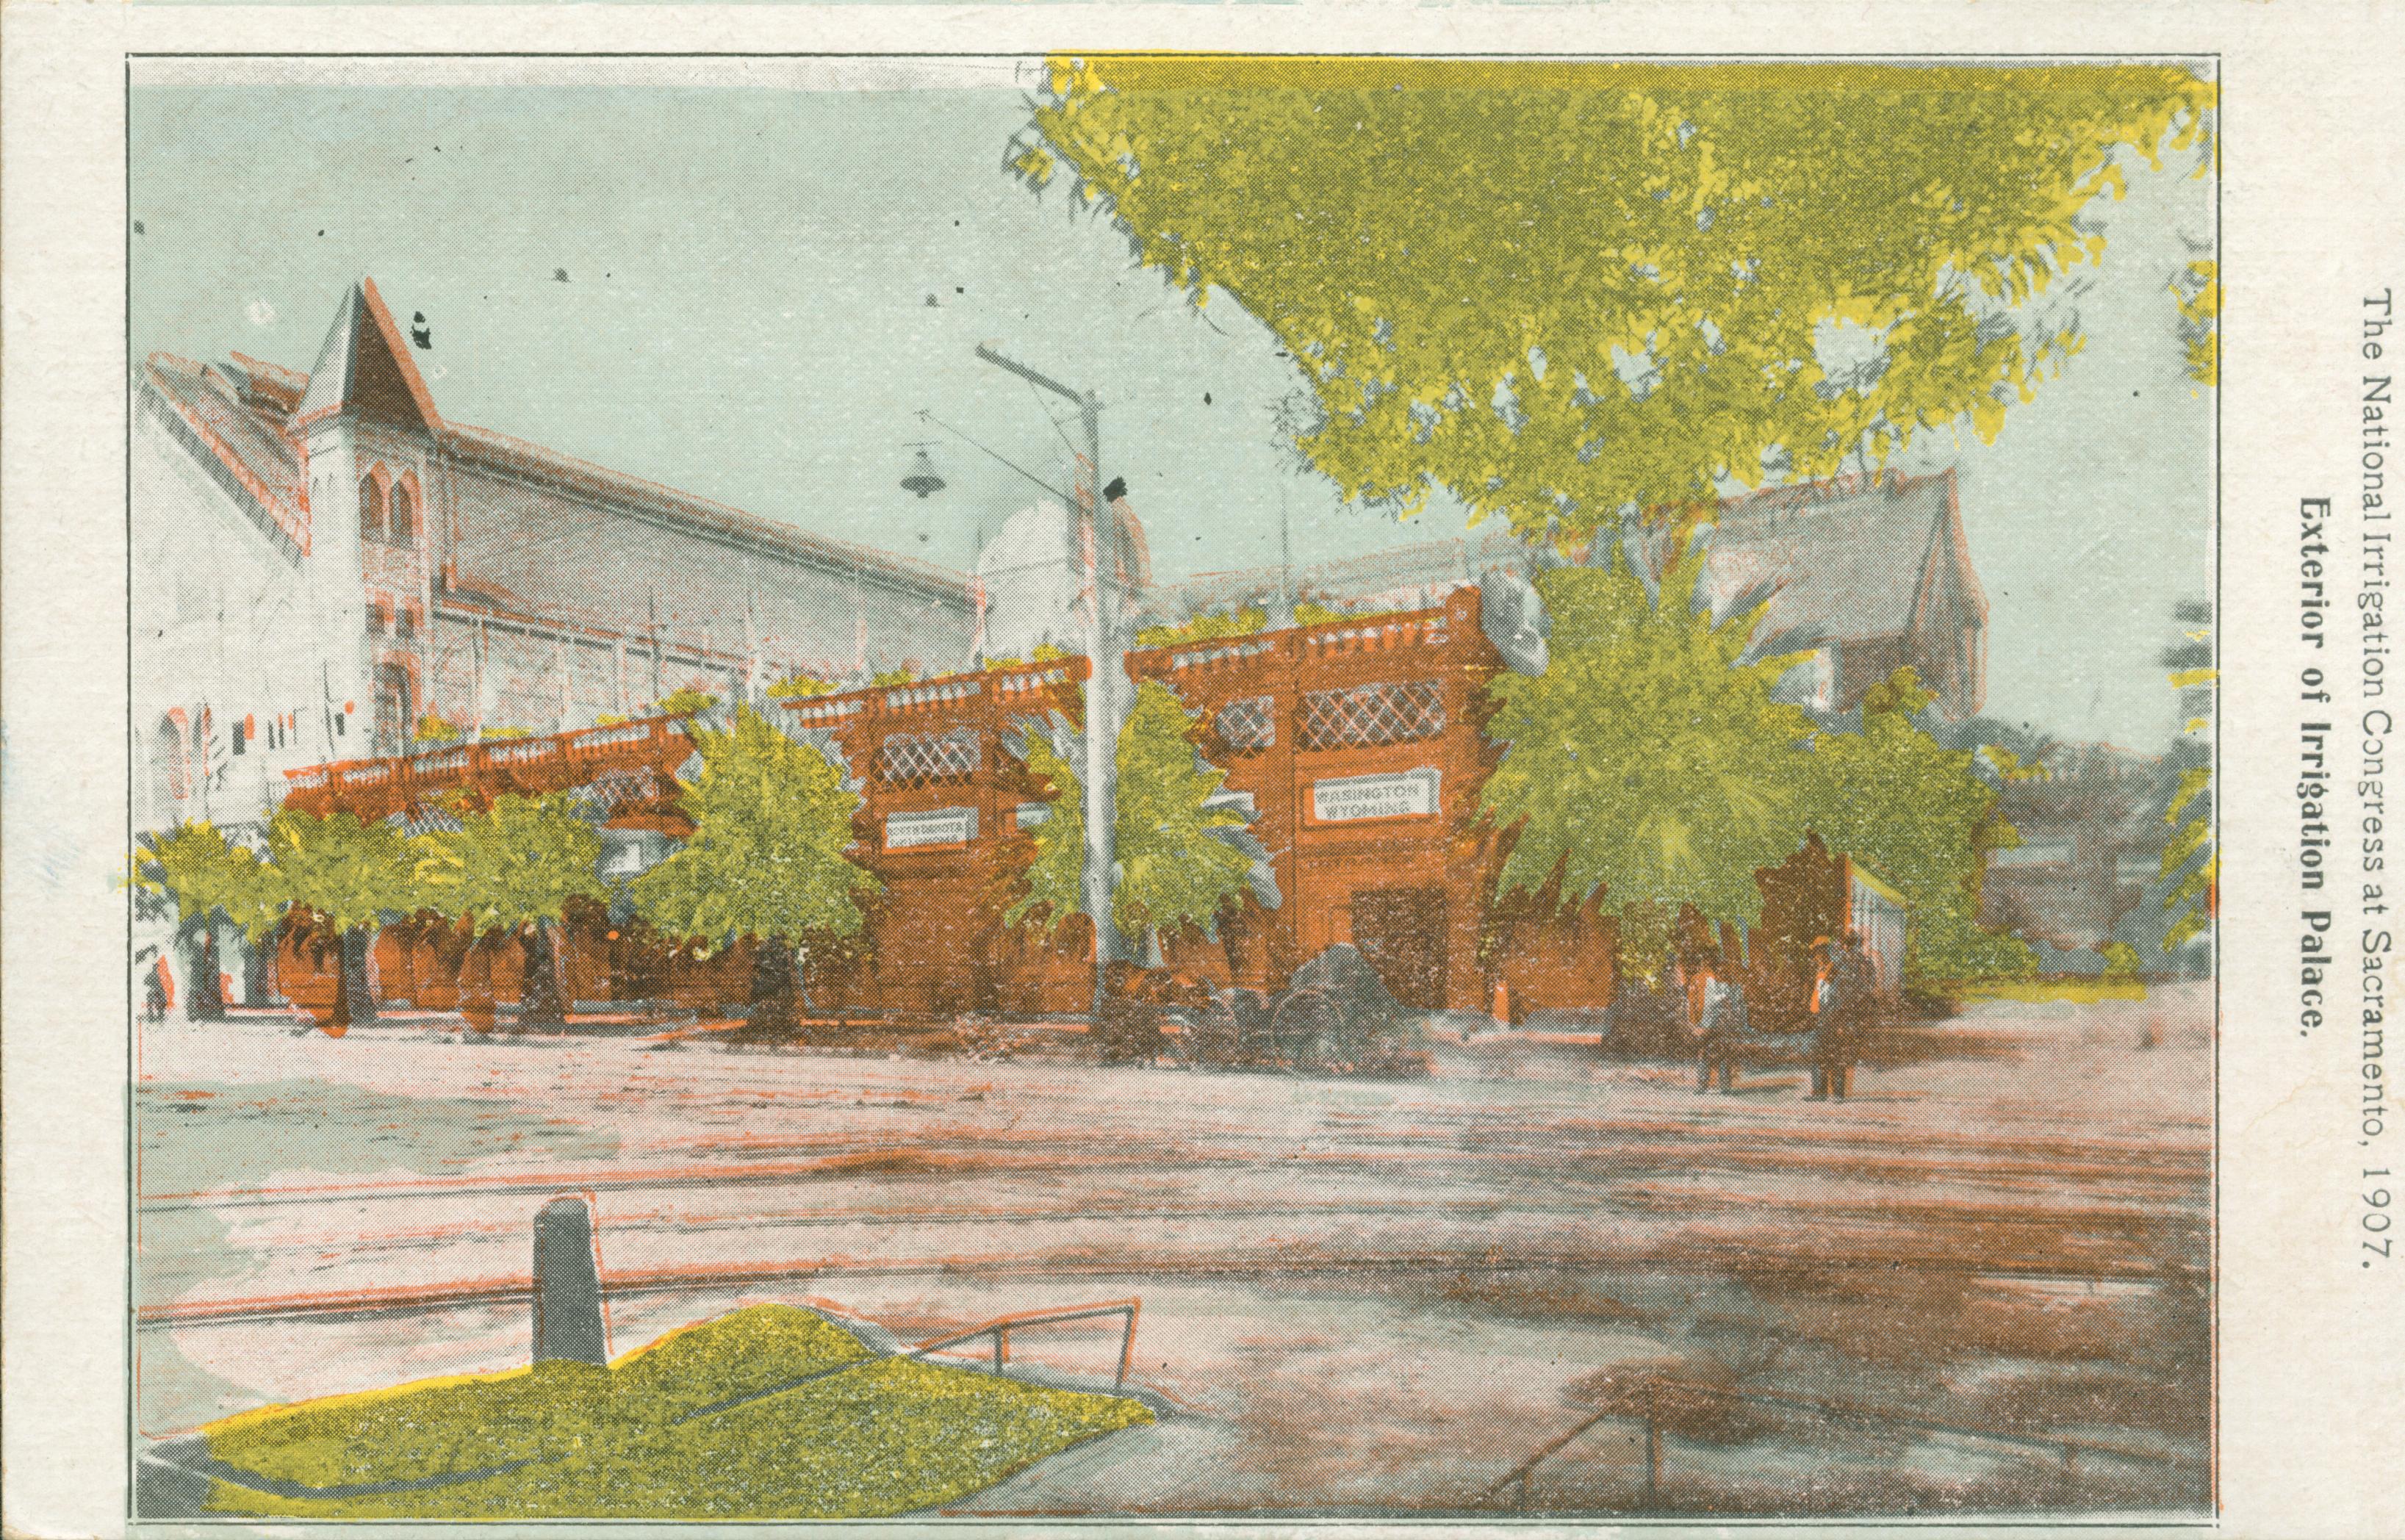 This postcard shows a side view of the Irrigation Palace in Sacramento.